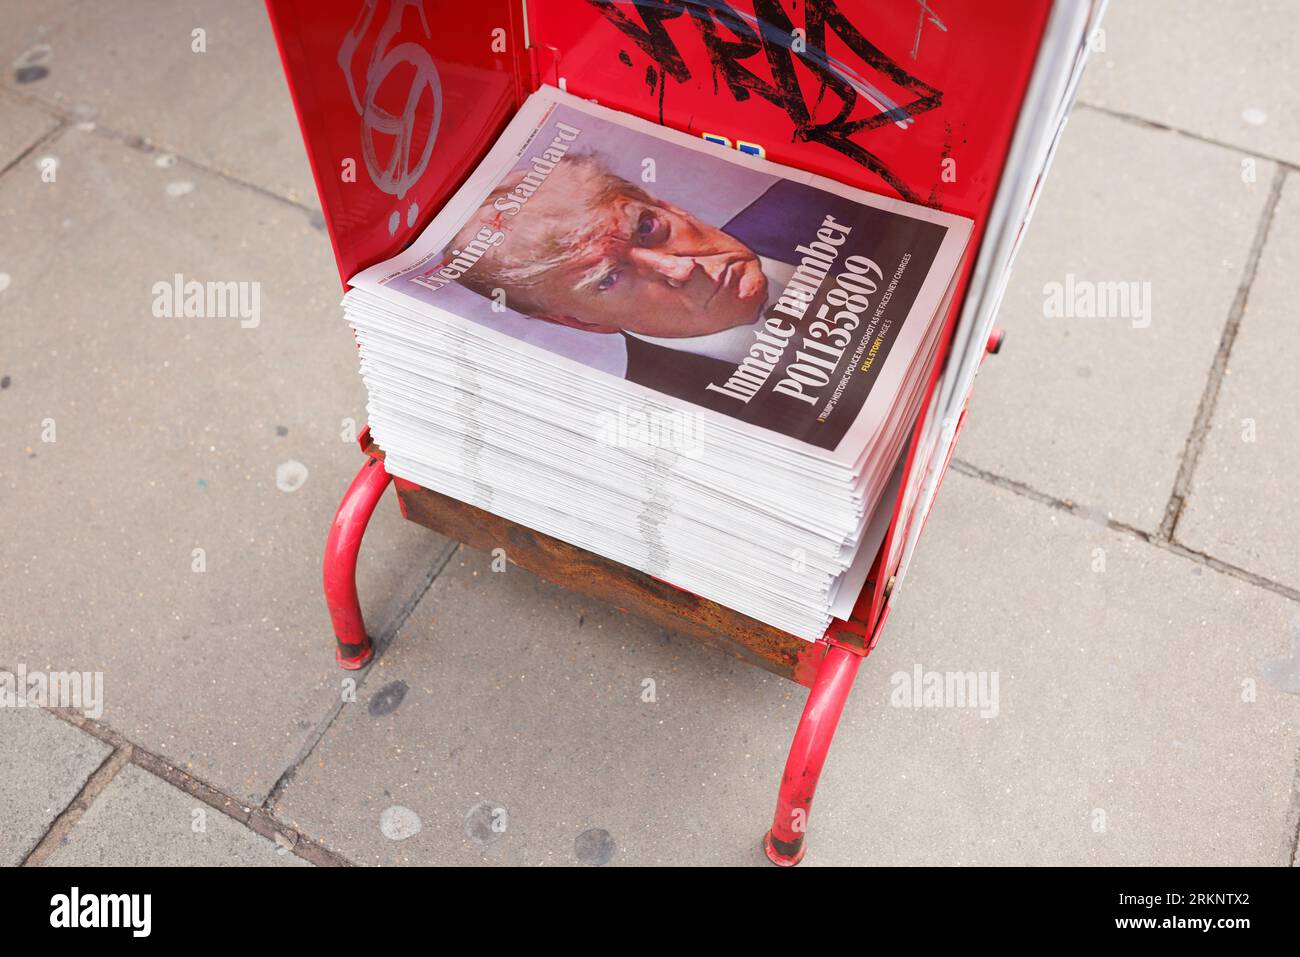 Police mug shot of Former President Donald John Trump on the front of the London Evening Standard newspaper, displayed on a newsstand in Oxford Circus Stock Photo